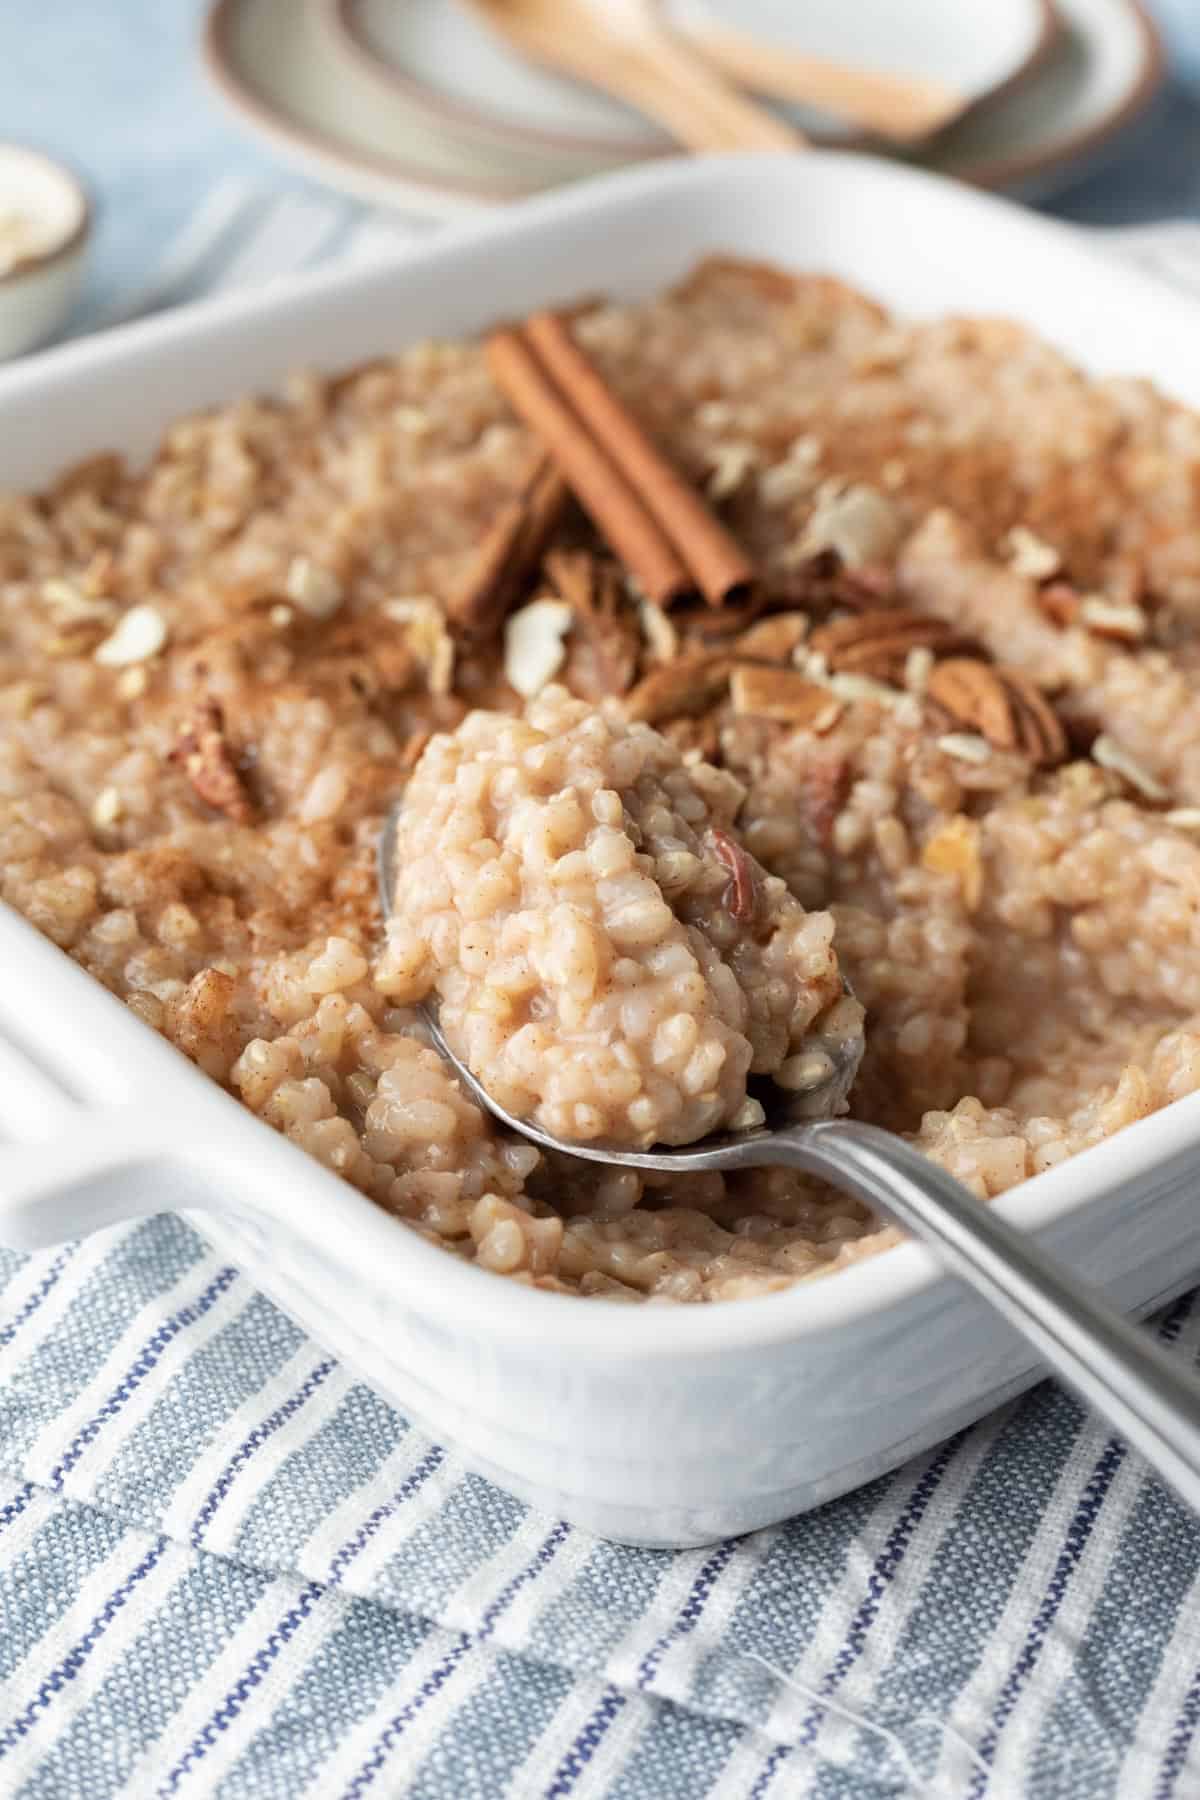 a spoon scooping up brown rice pudding made with almond milk.